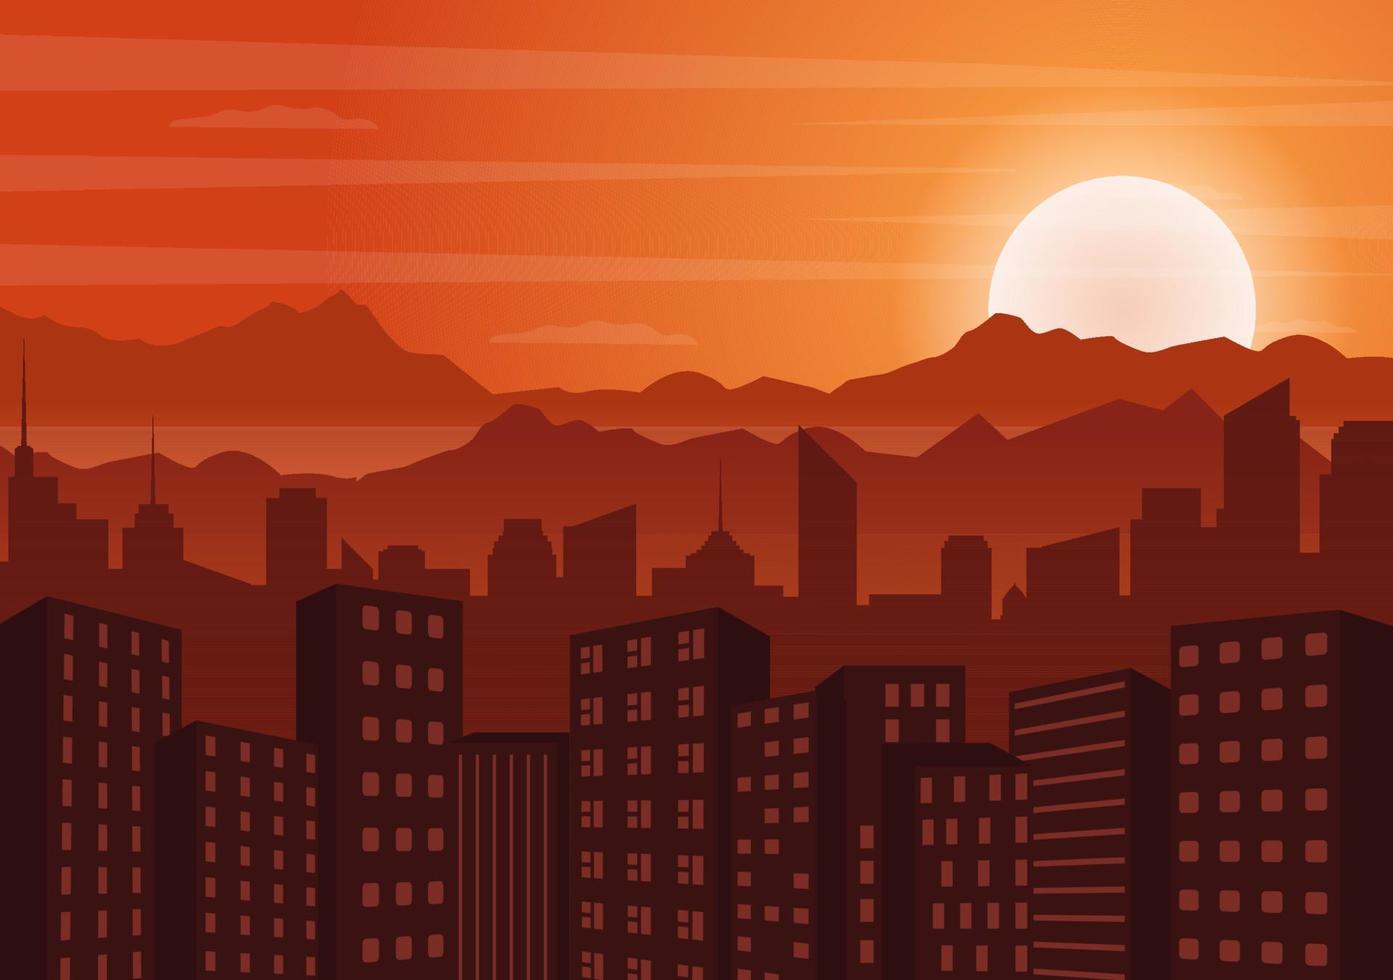 Sunset Modern City Skyline Landscape with Orange Sky of Town Buildings and Cityscape Sky in Flat Illustration for Poster, Banner or Background vector